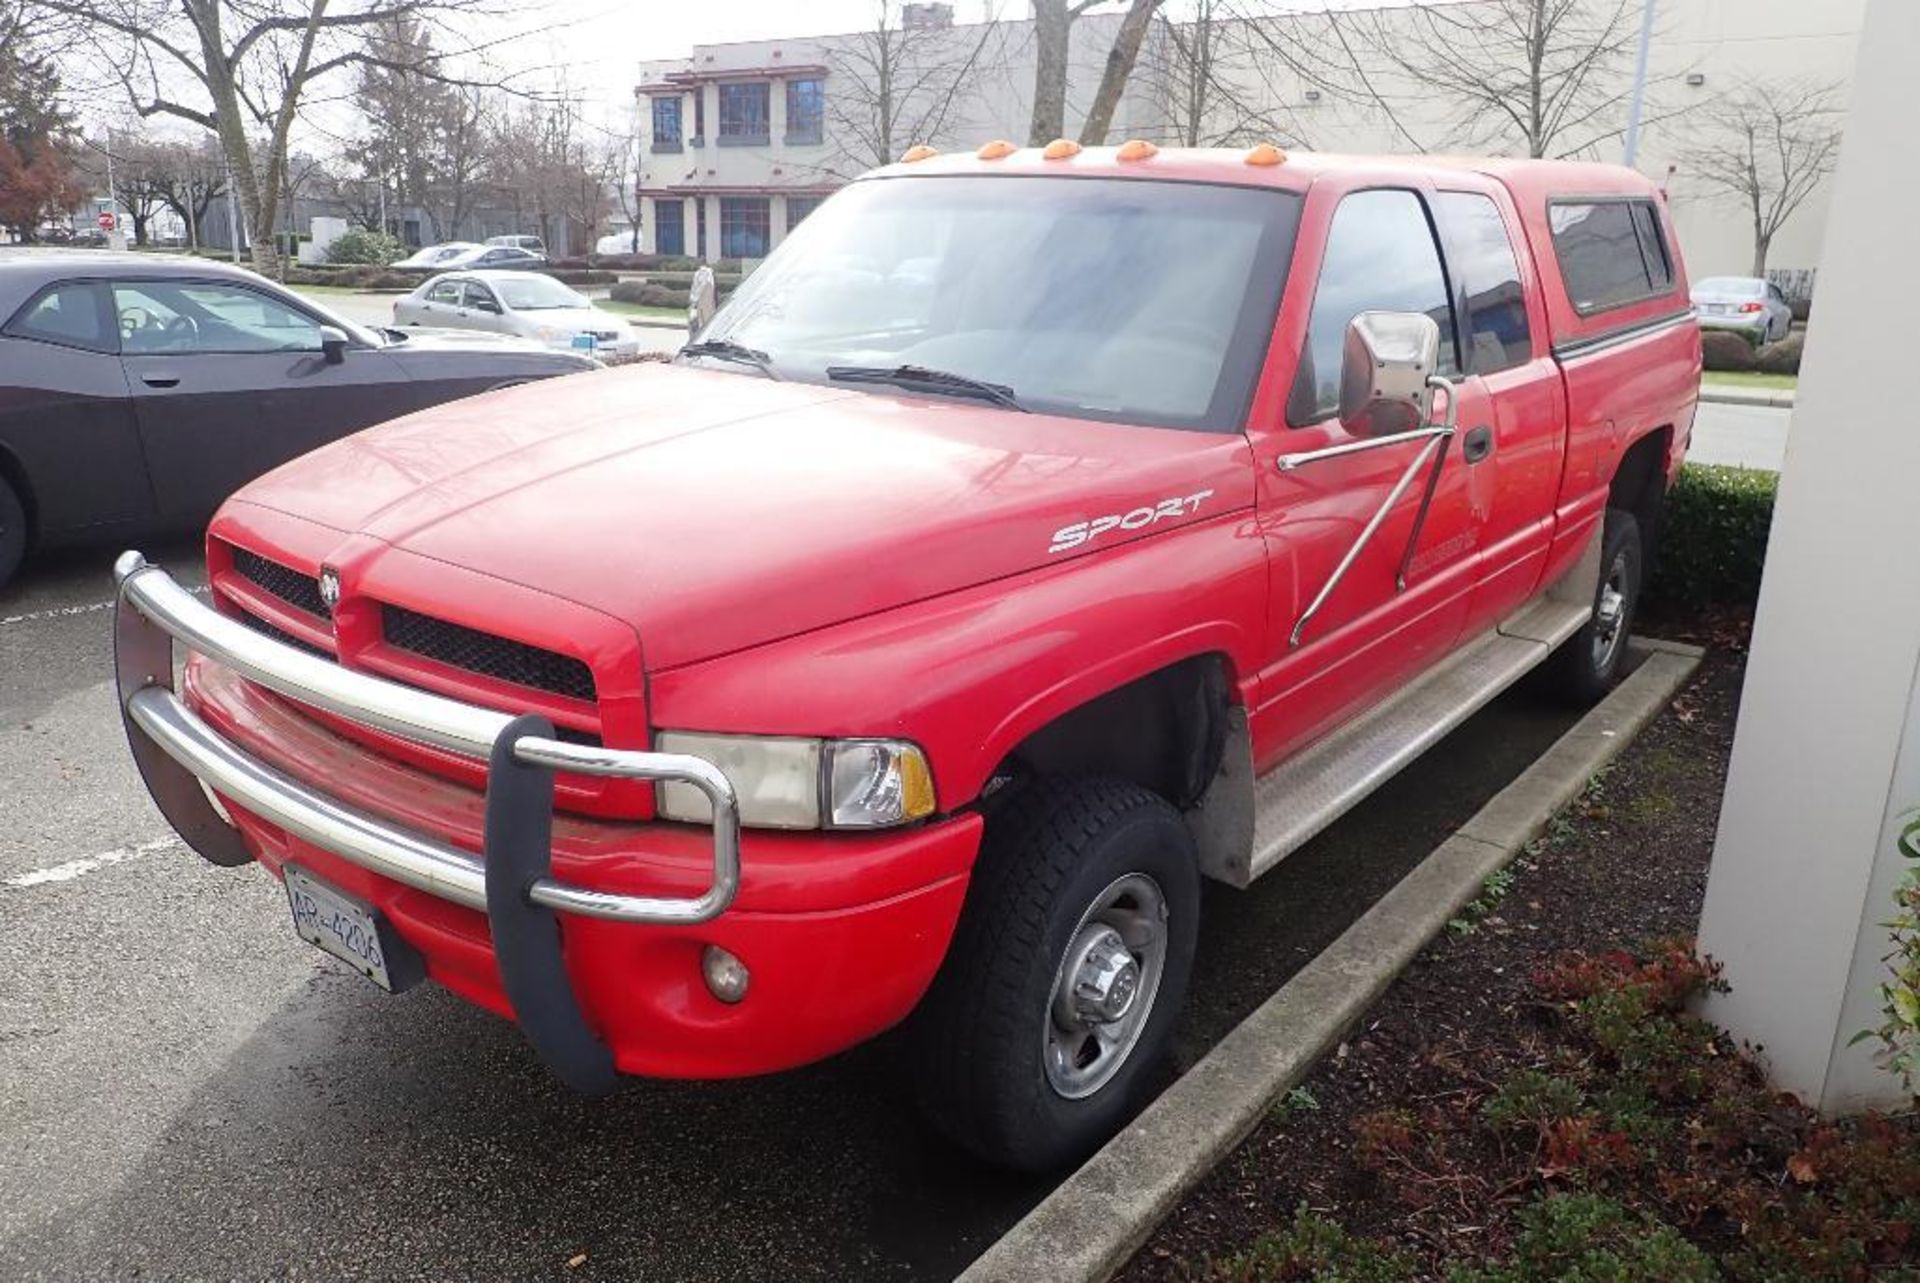 1998 Dodge Ram 2500 sport pickup truck, 4x4, 5.9L V8 gas engine, automatic transmission, extended ca - Image 3 of 18